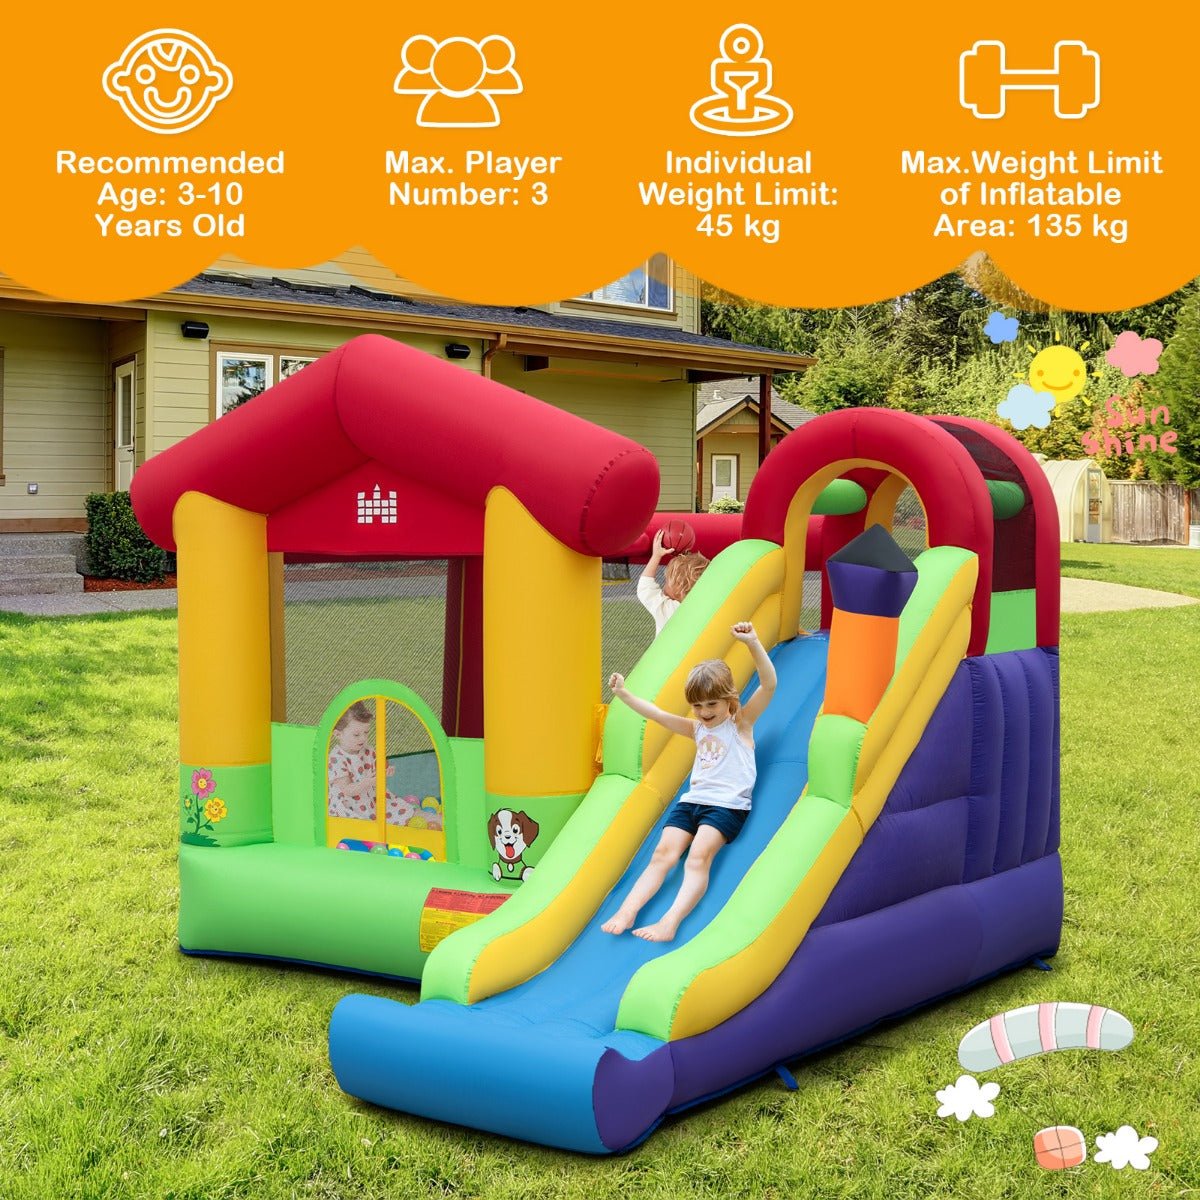 Bounce and Climb with the Inflatable Bounce House - Order Today!